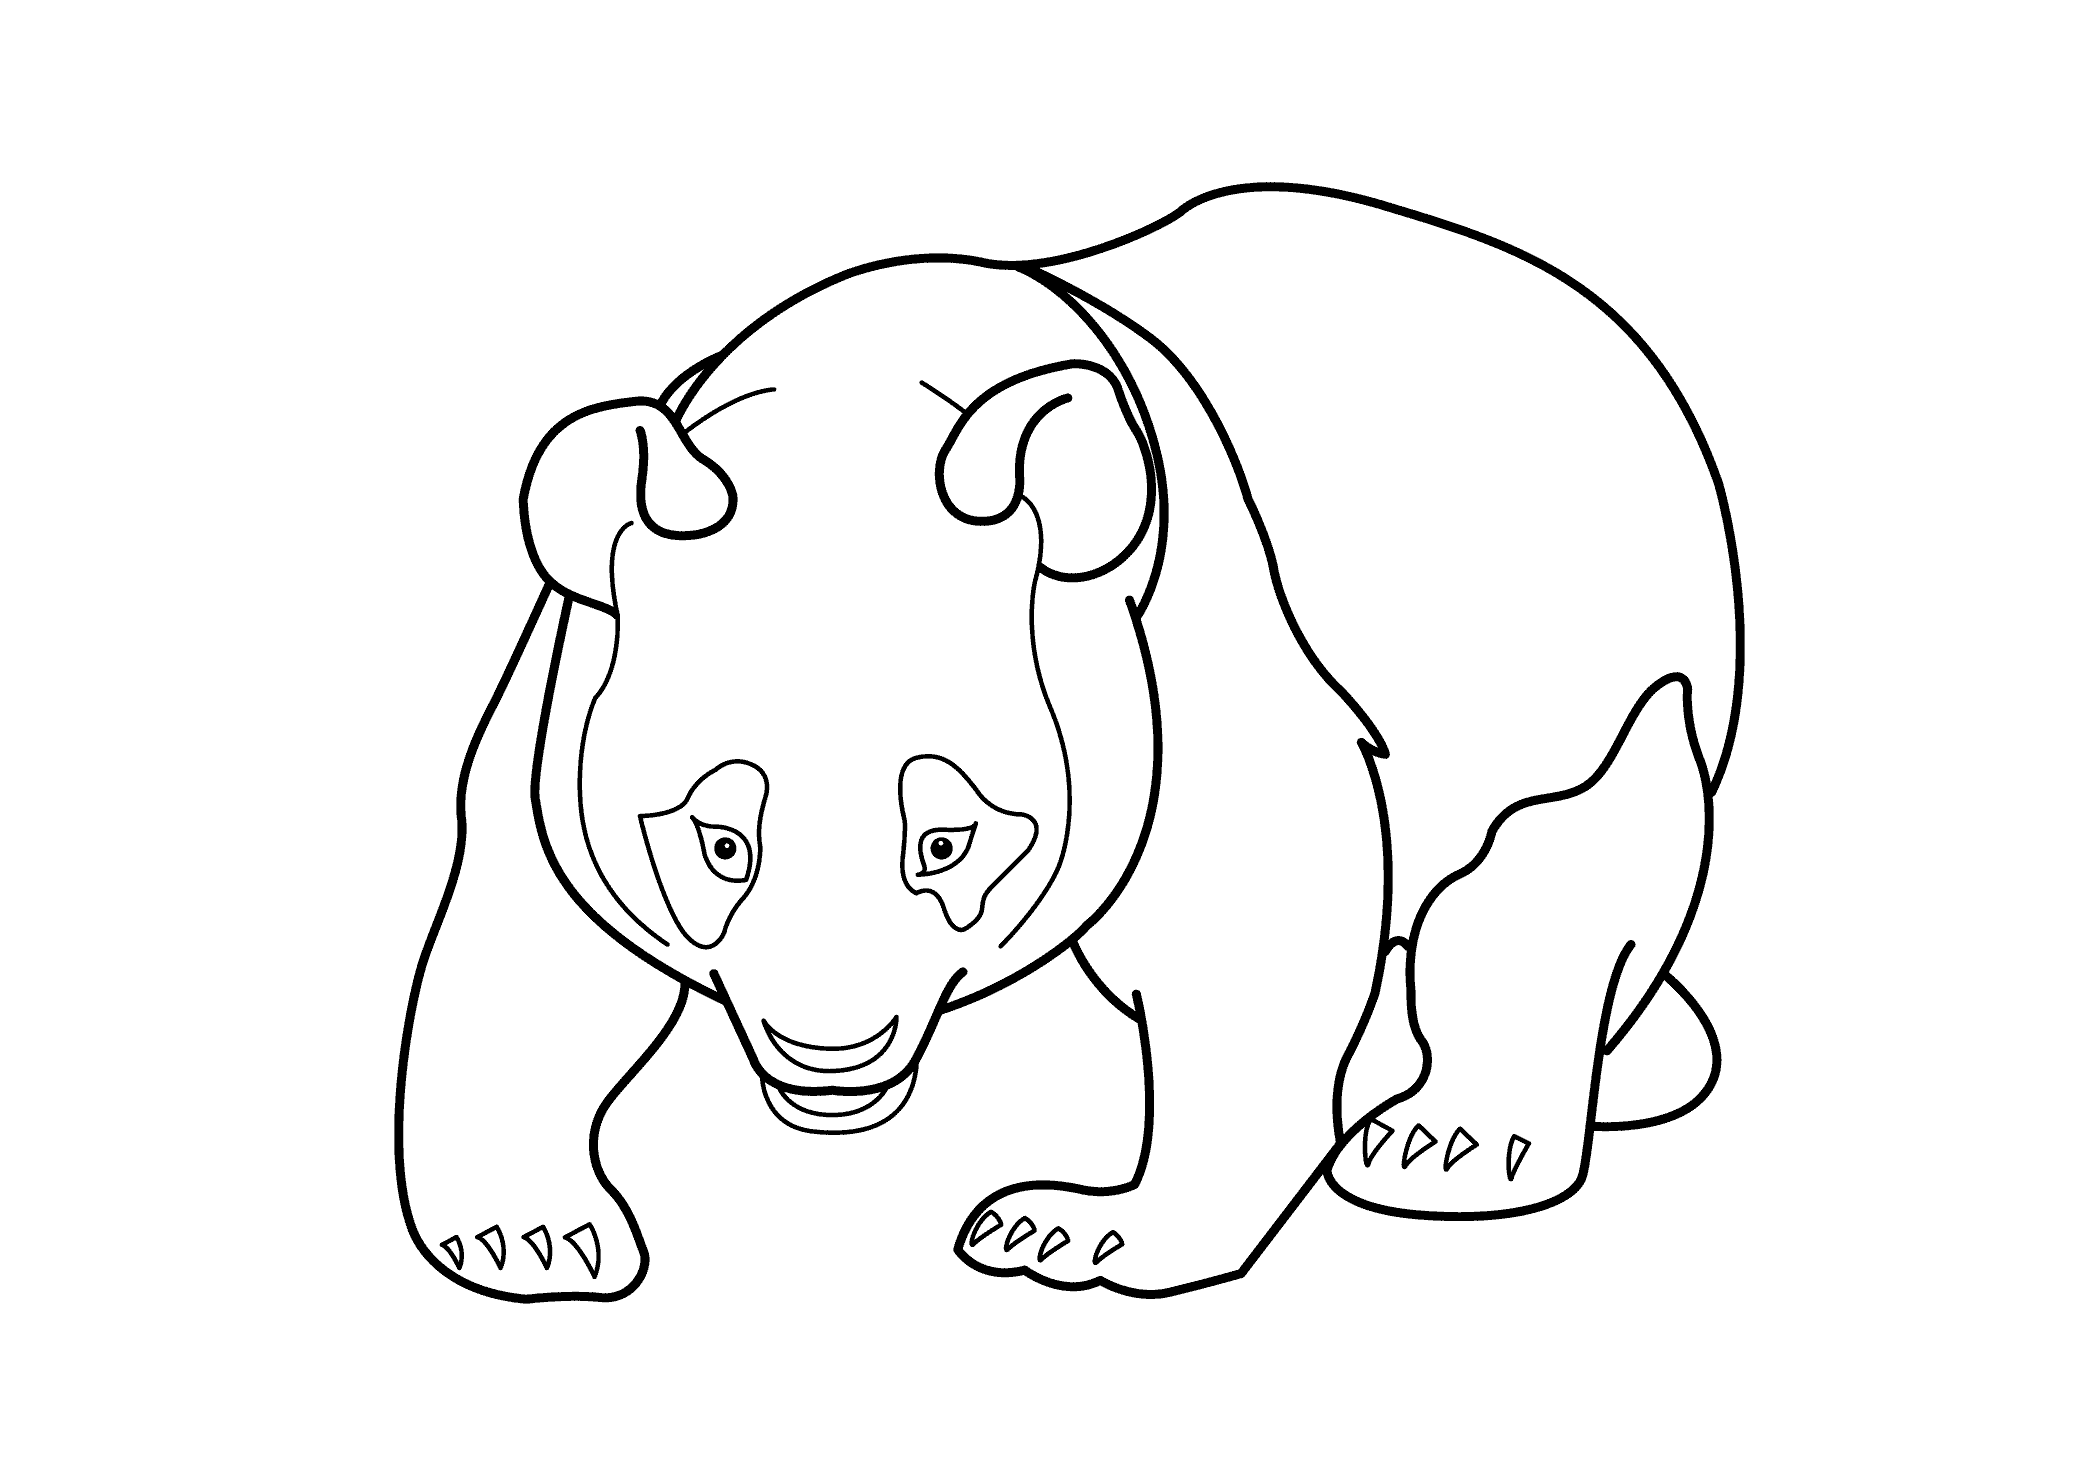 panda coloring page panda coloring pages best coloring pages for kids page panda coloring 1 1